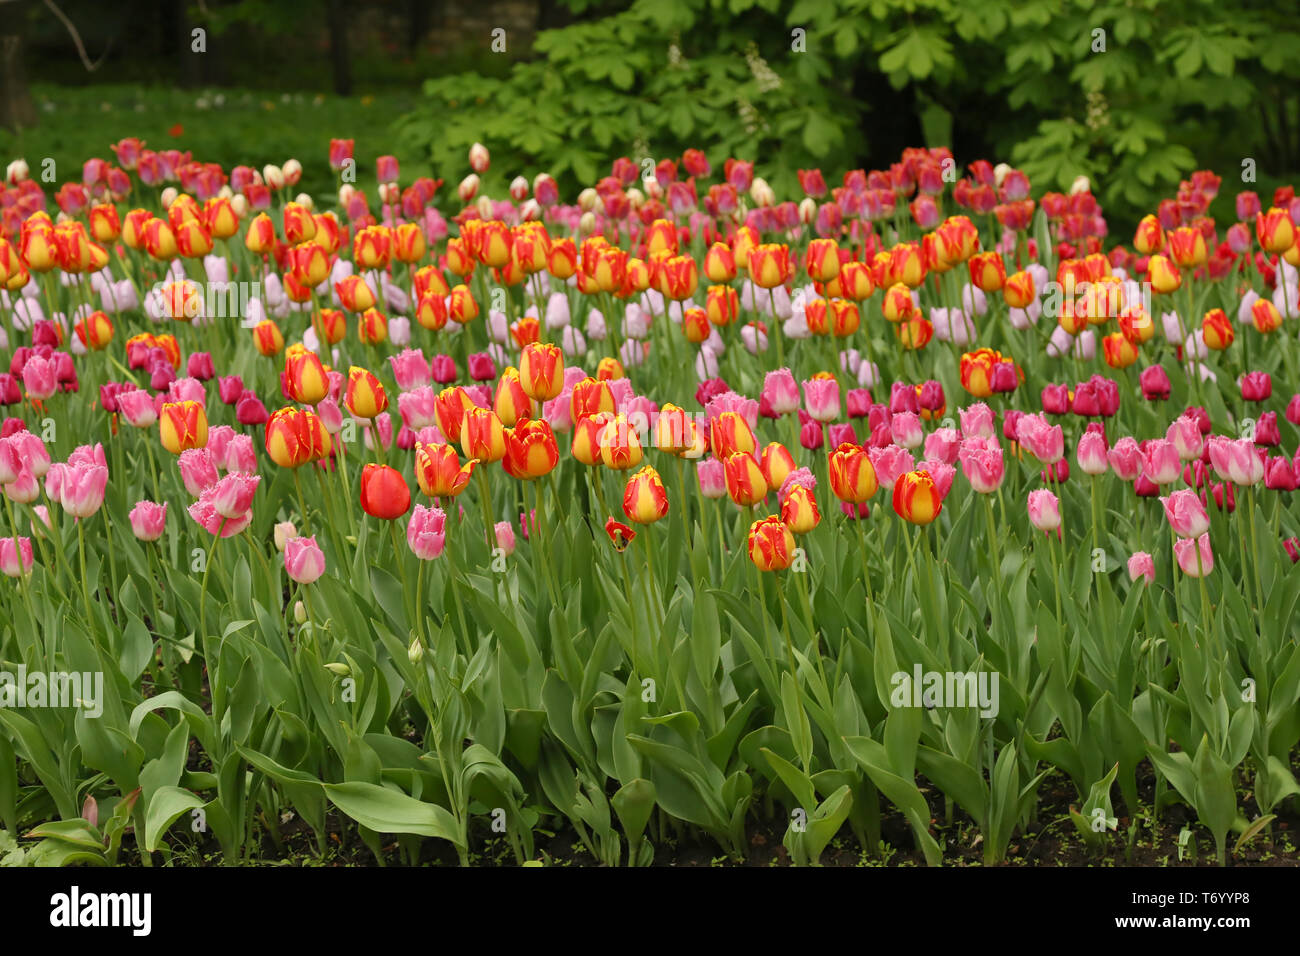 Spring flowers in a garden. Multicolored tulips Stock Photo